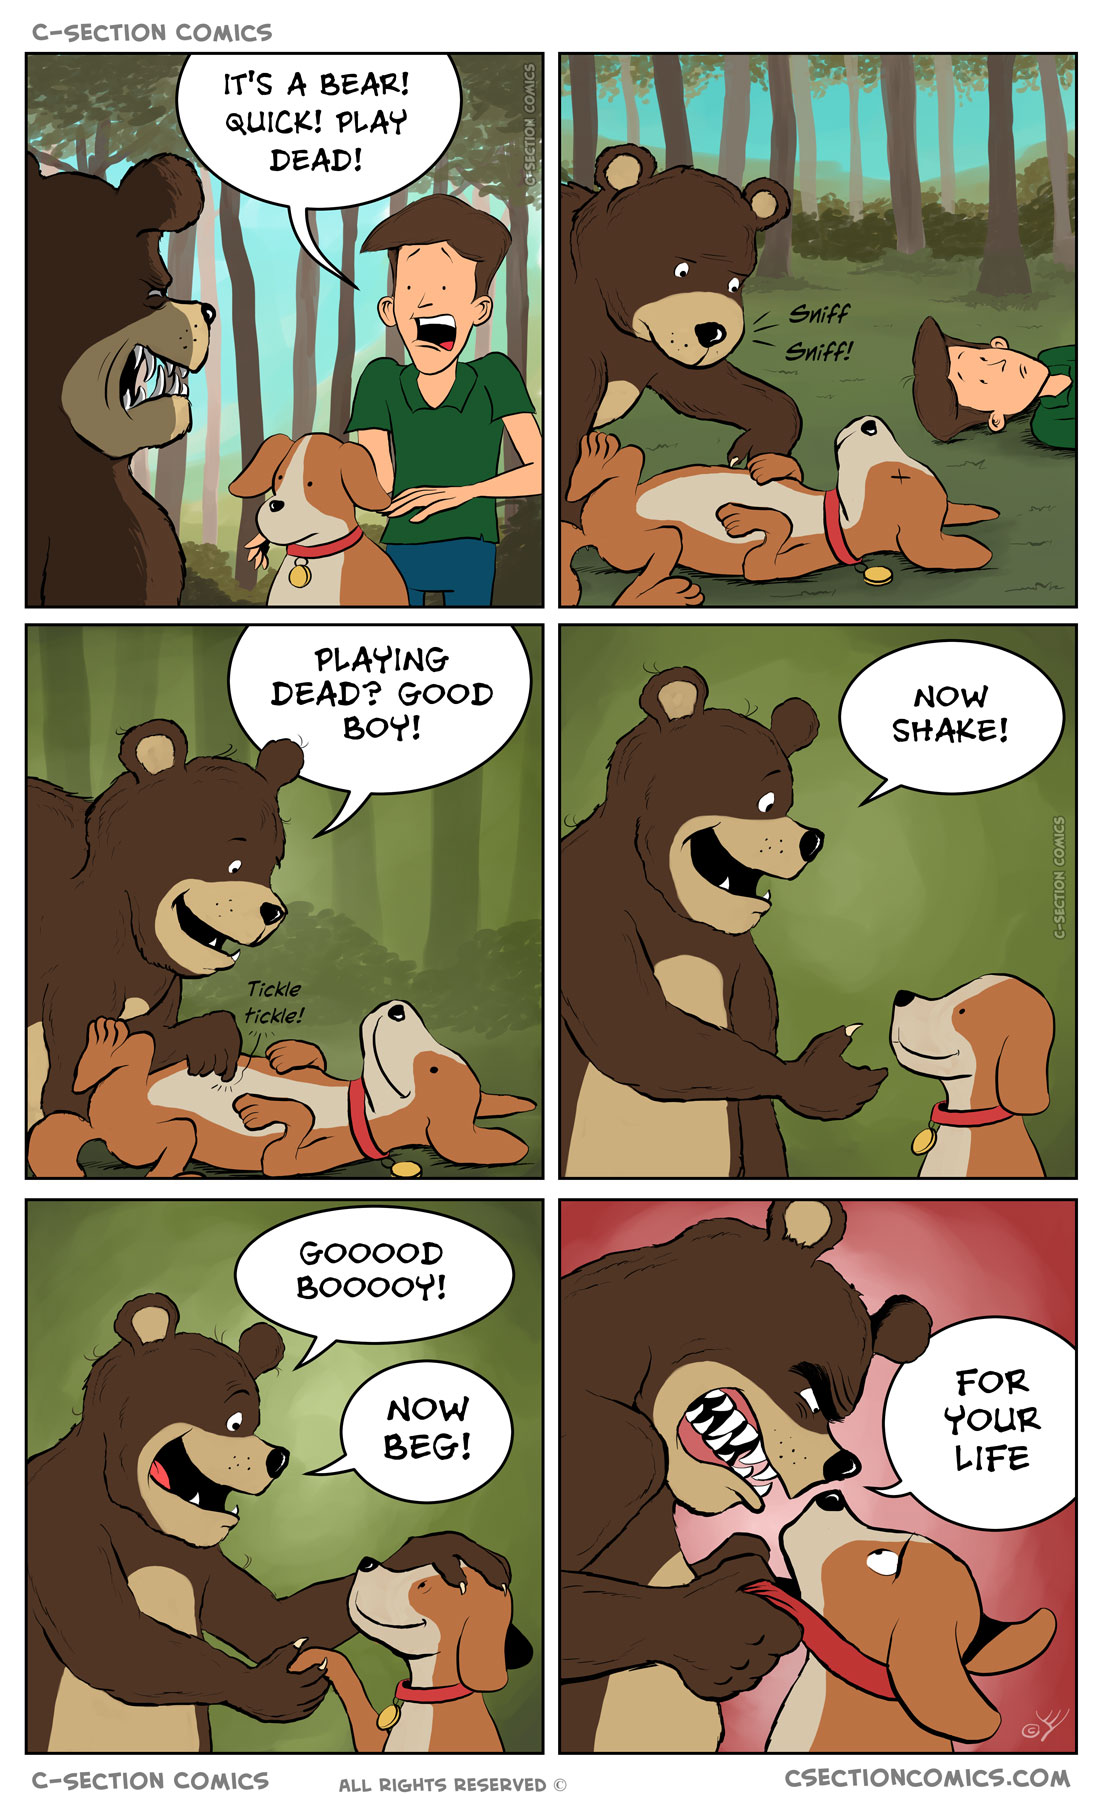 Drawing this comic was... un-bear-ably ruff  ----- ***(+5000 for DOUBLE PUN, LEVEL UP)***